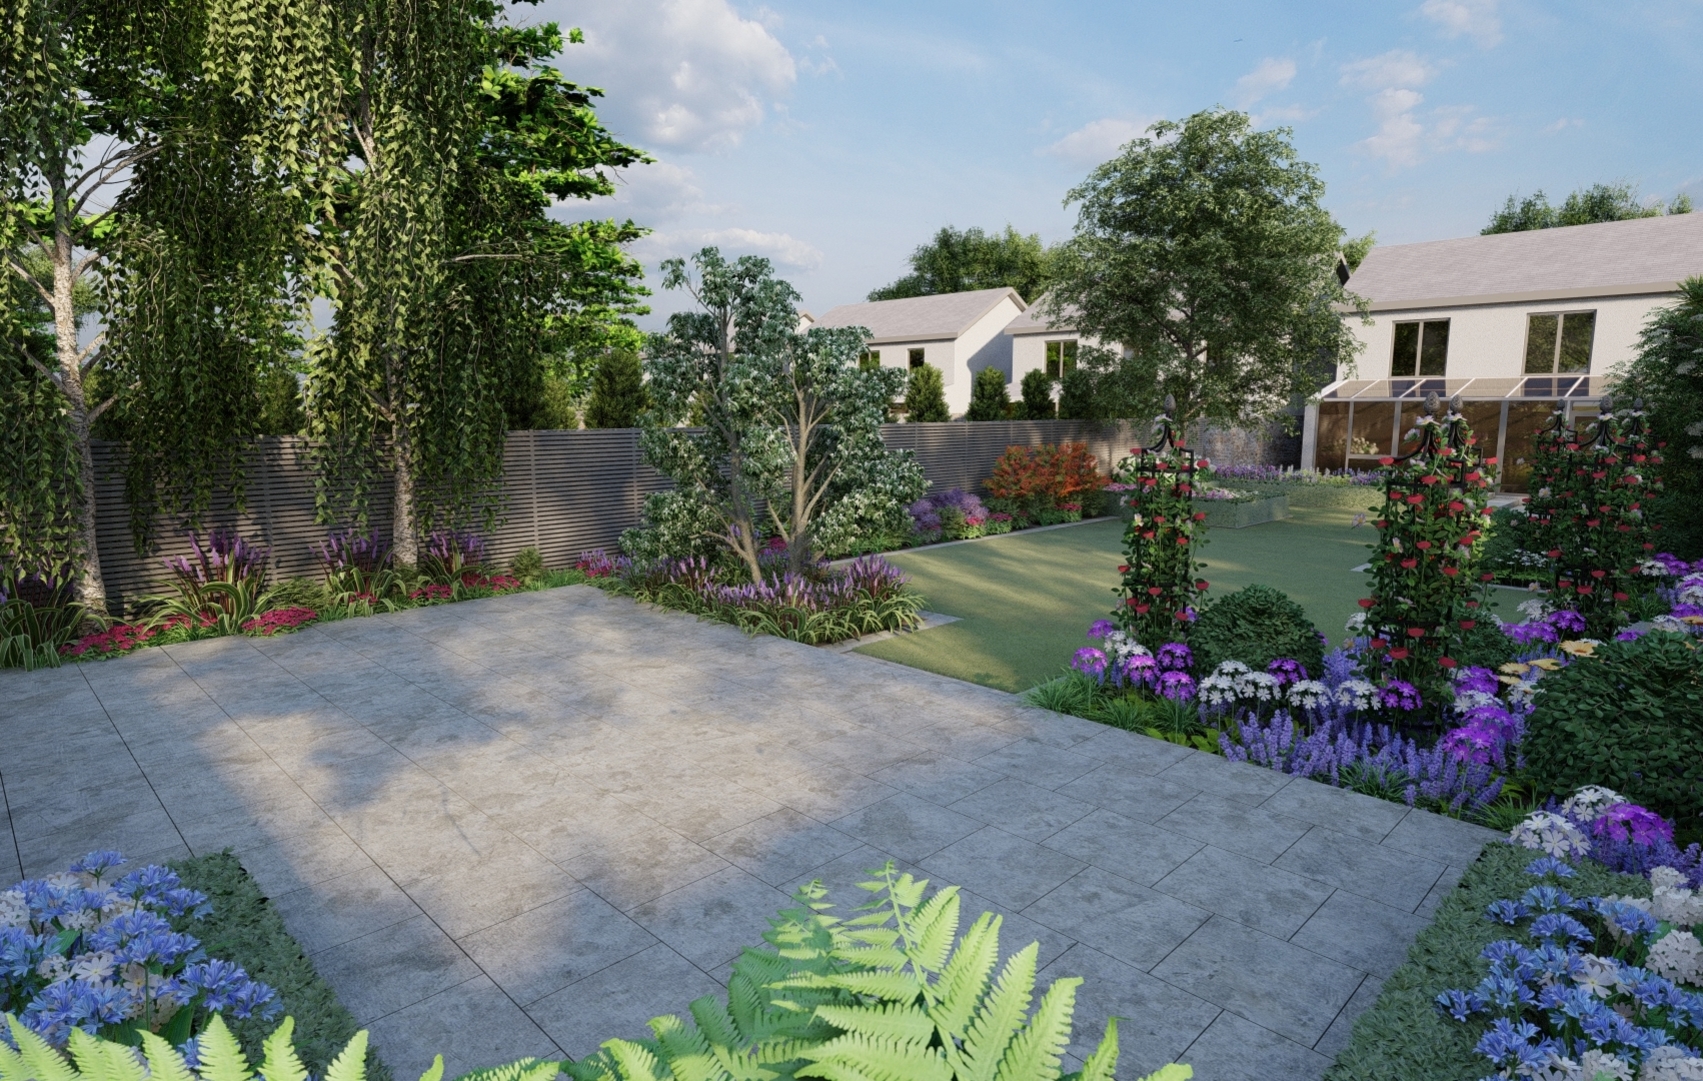 Design Visual showing the expansive raised limestone patio space with plenty of capacity, scope and flexibility for outdoor living and entertaining | Owen Chubb Garden Design